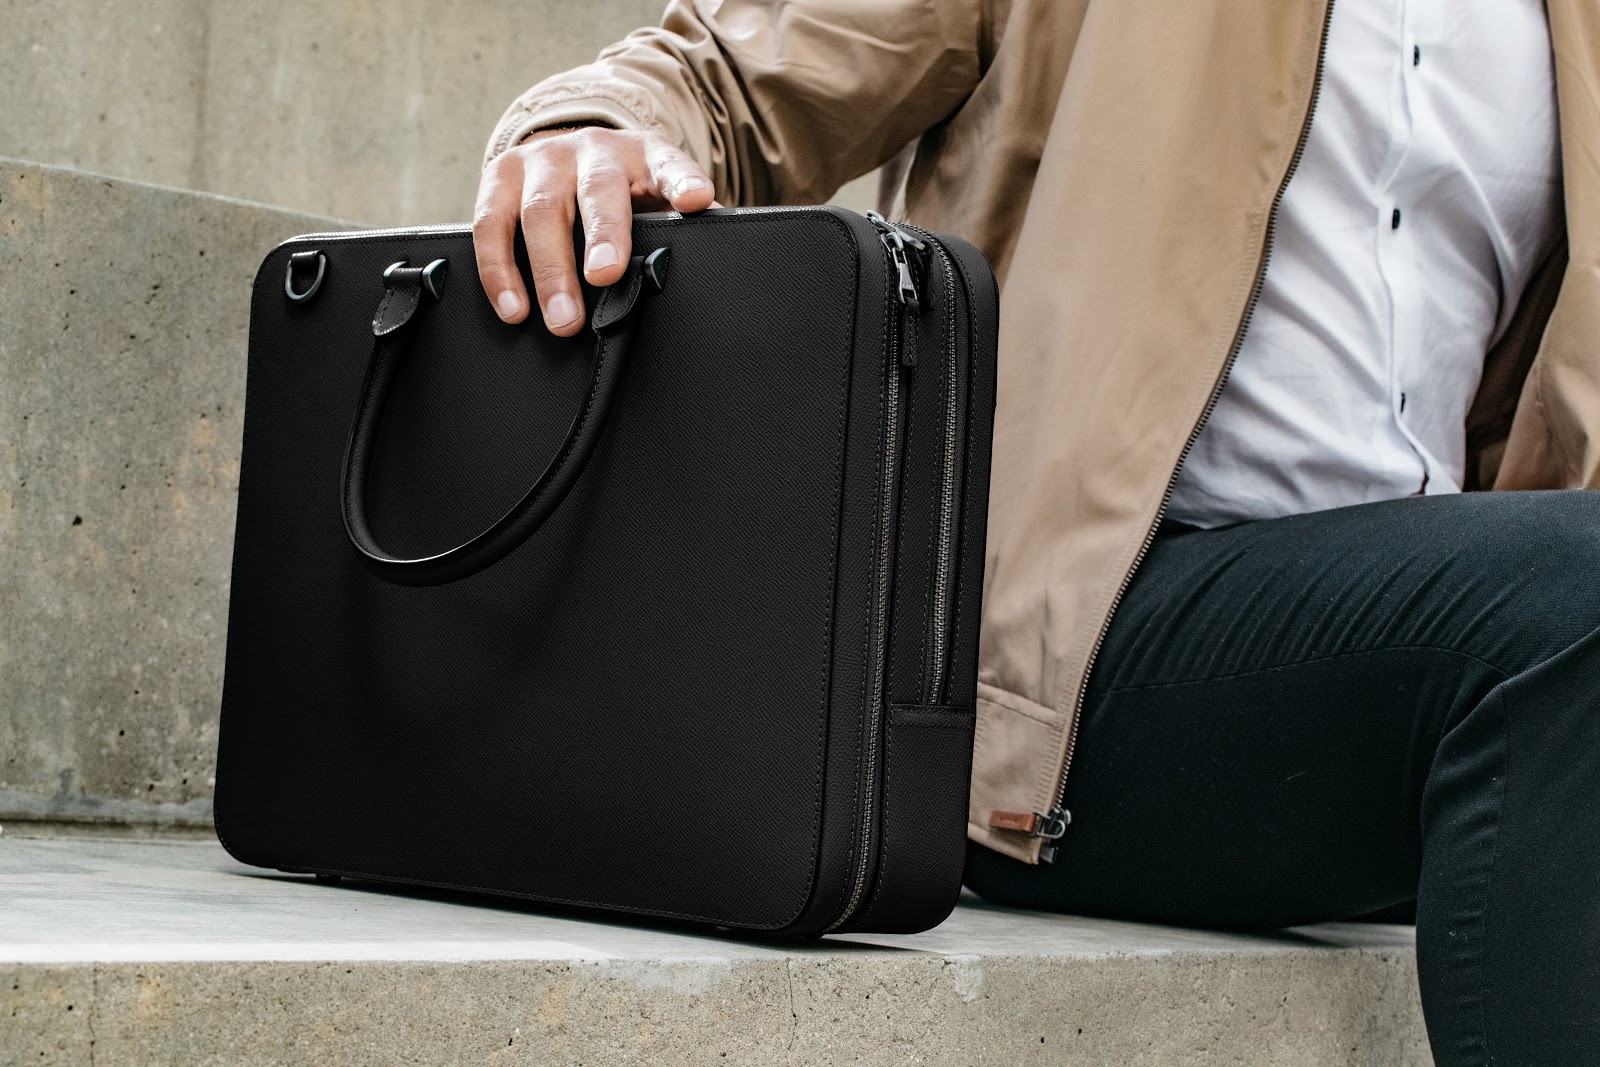 capitalizing-on-kickstarter-to-start-a-2-3m-leather-bags-and-accessories-brand